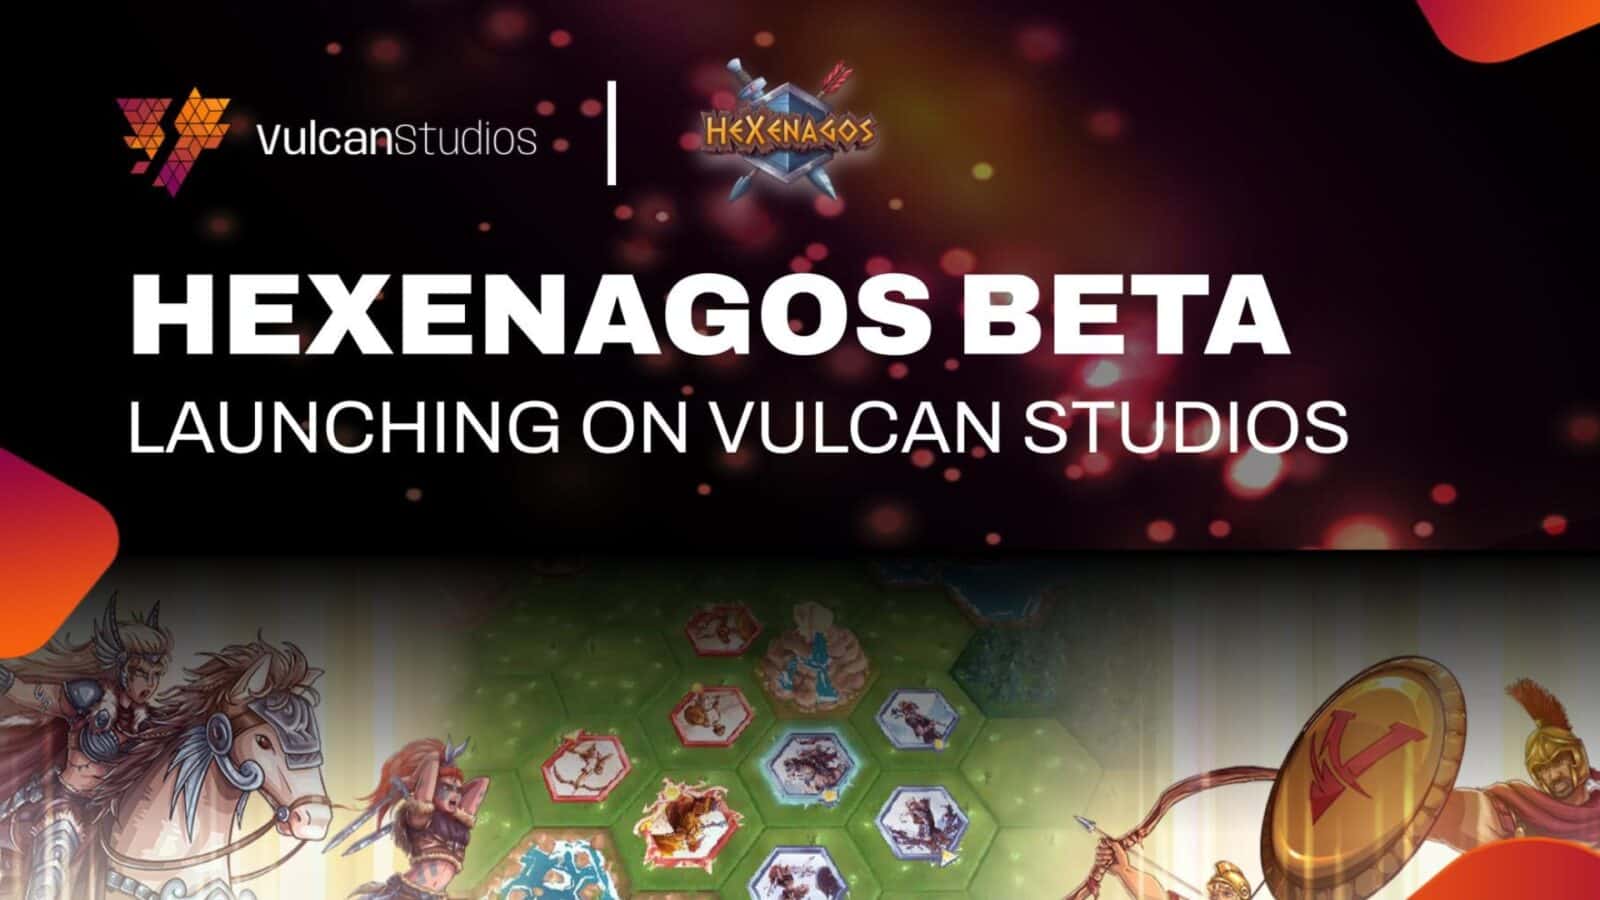 HeXenagos, a Web3-powered strategic PvP game by Vulcan Forged, has kicked off its Open Beta, inviting everyone to test the game and provide valuable feedback to the team for future improvements. Additionally, HeXenagos is part of the Vulcan Studios portfolio of games.